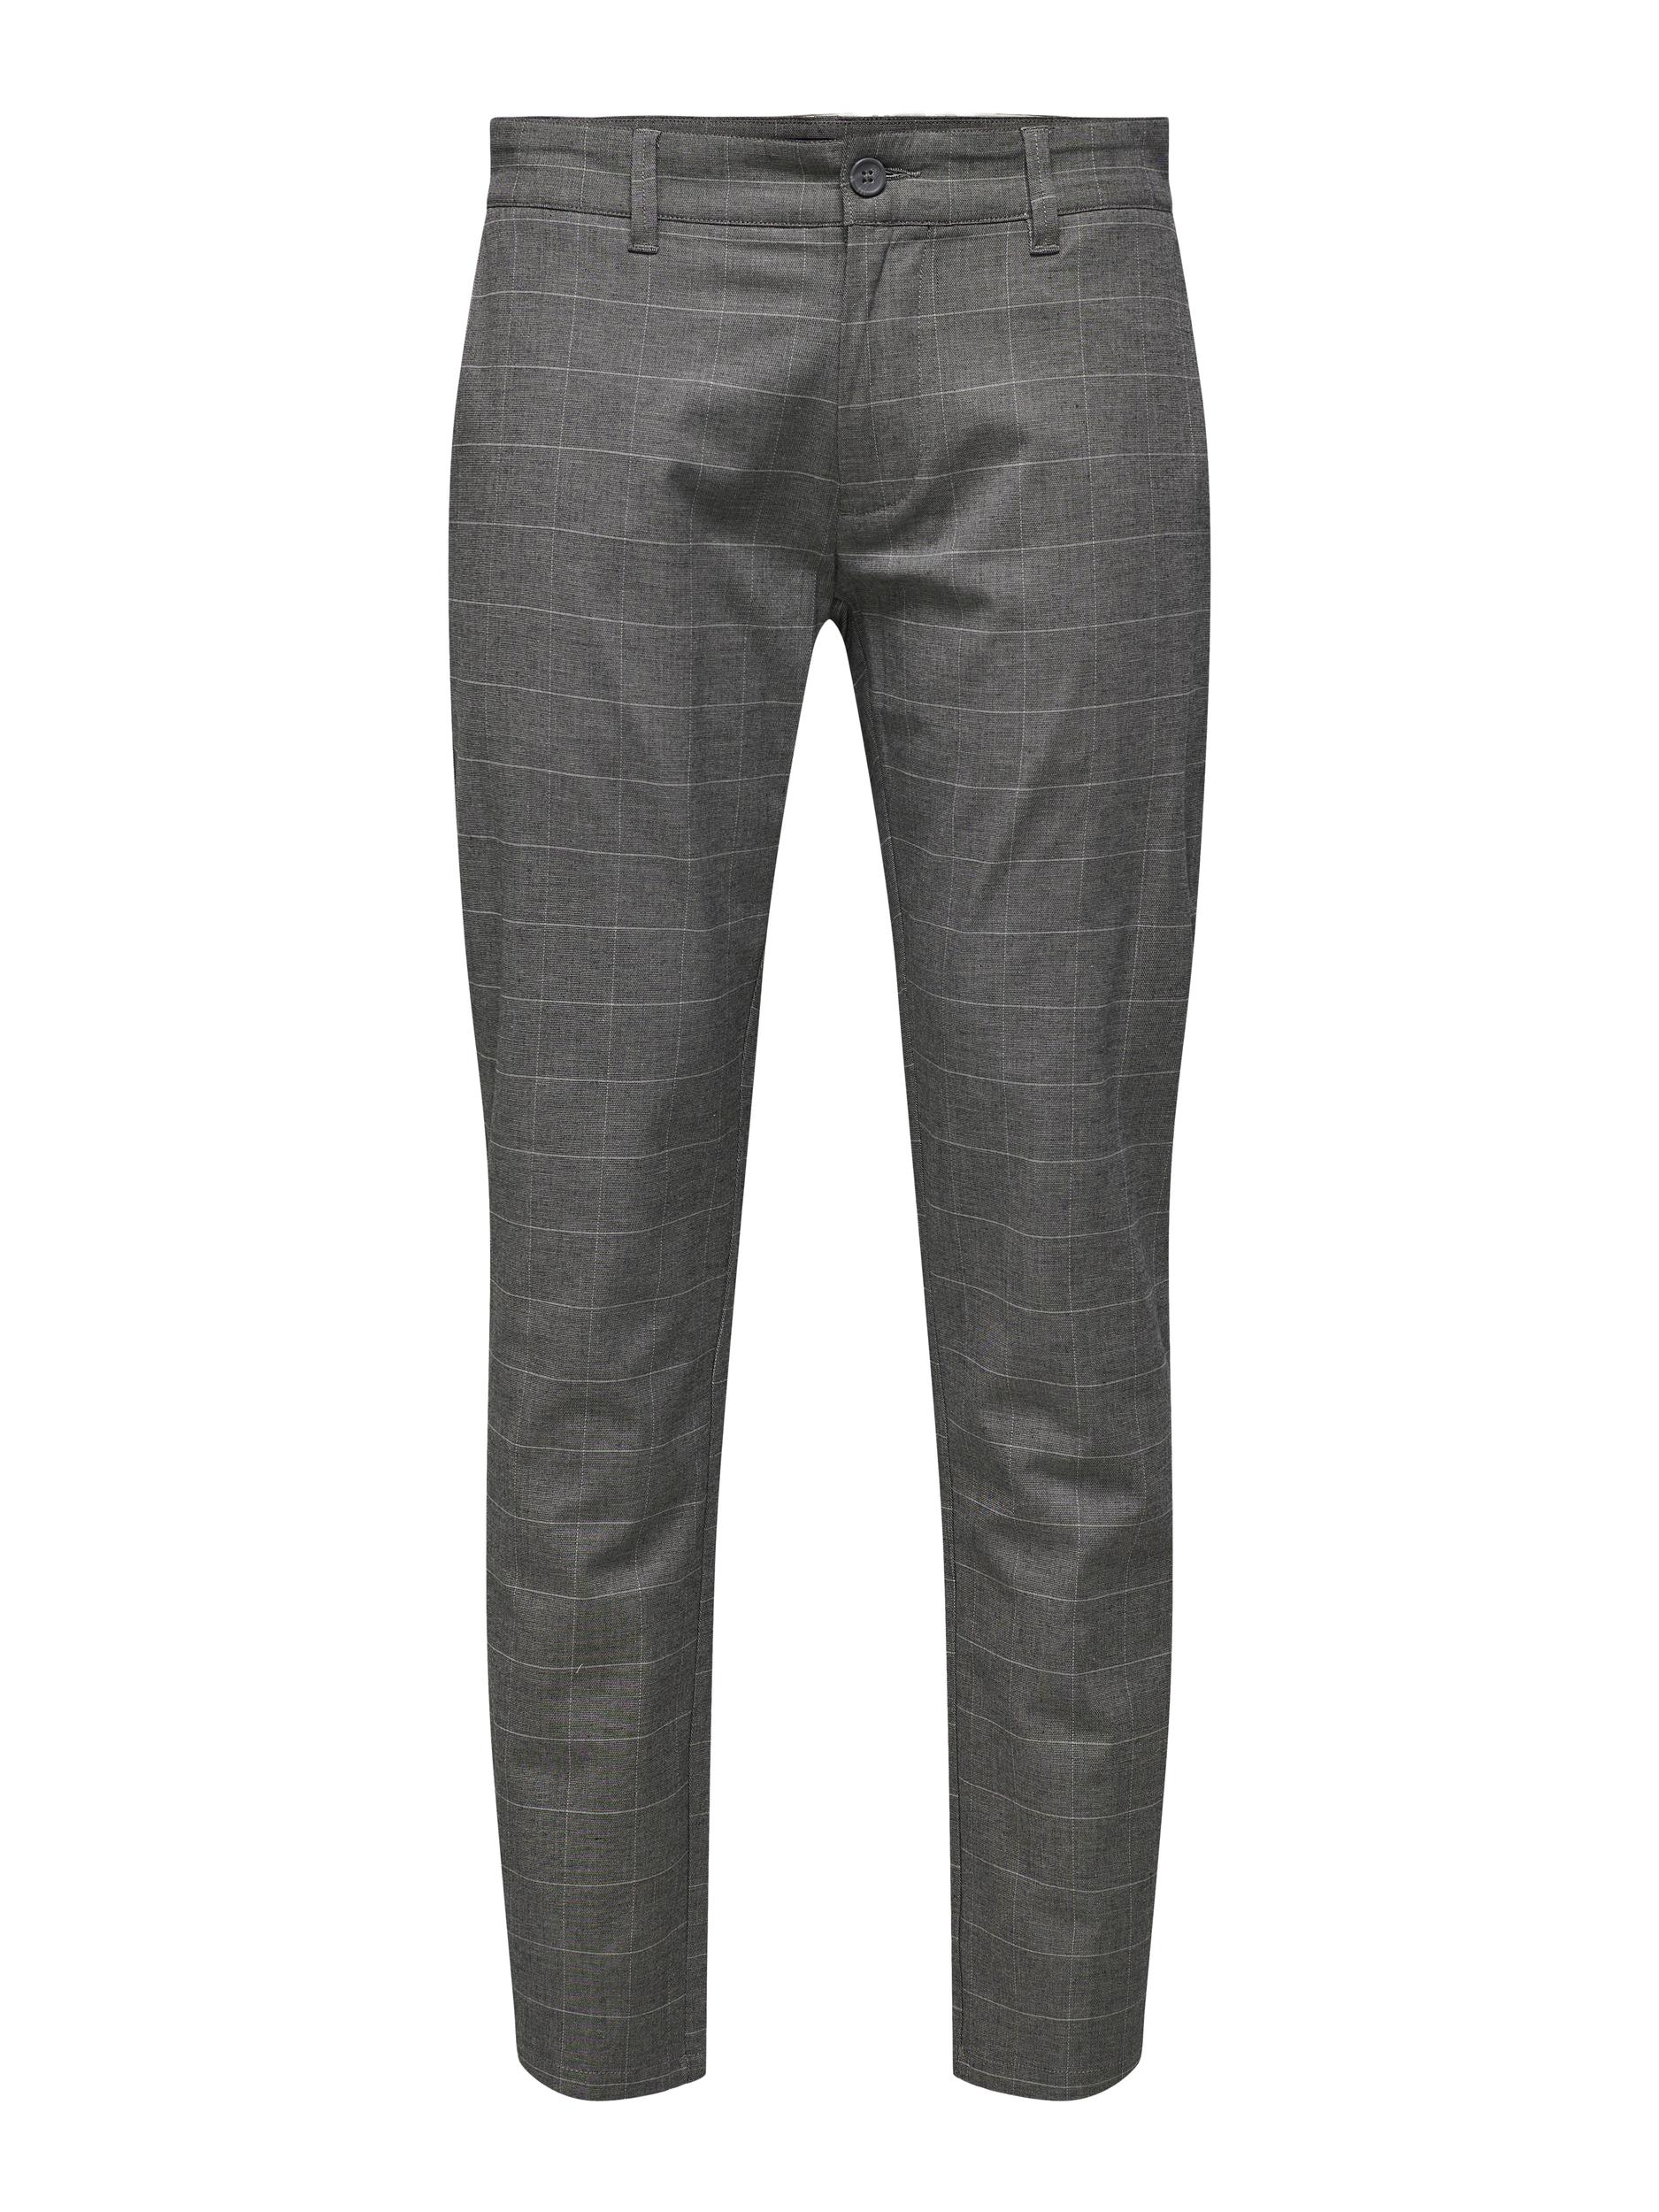 ONLY Mark Check Chinos, Grey Pinstripe, W32/L34